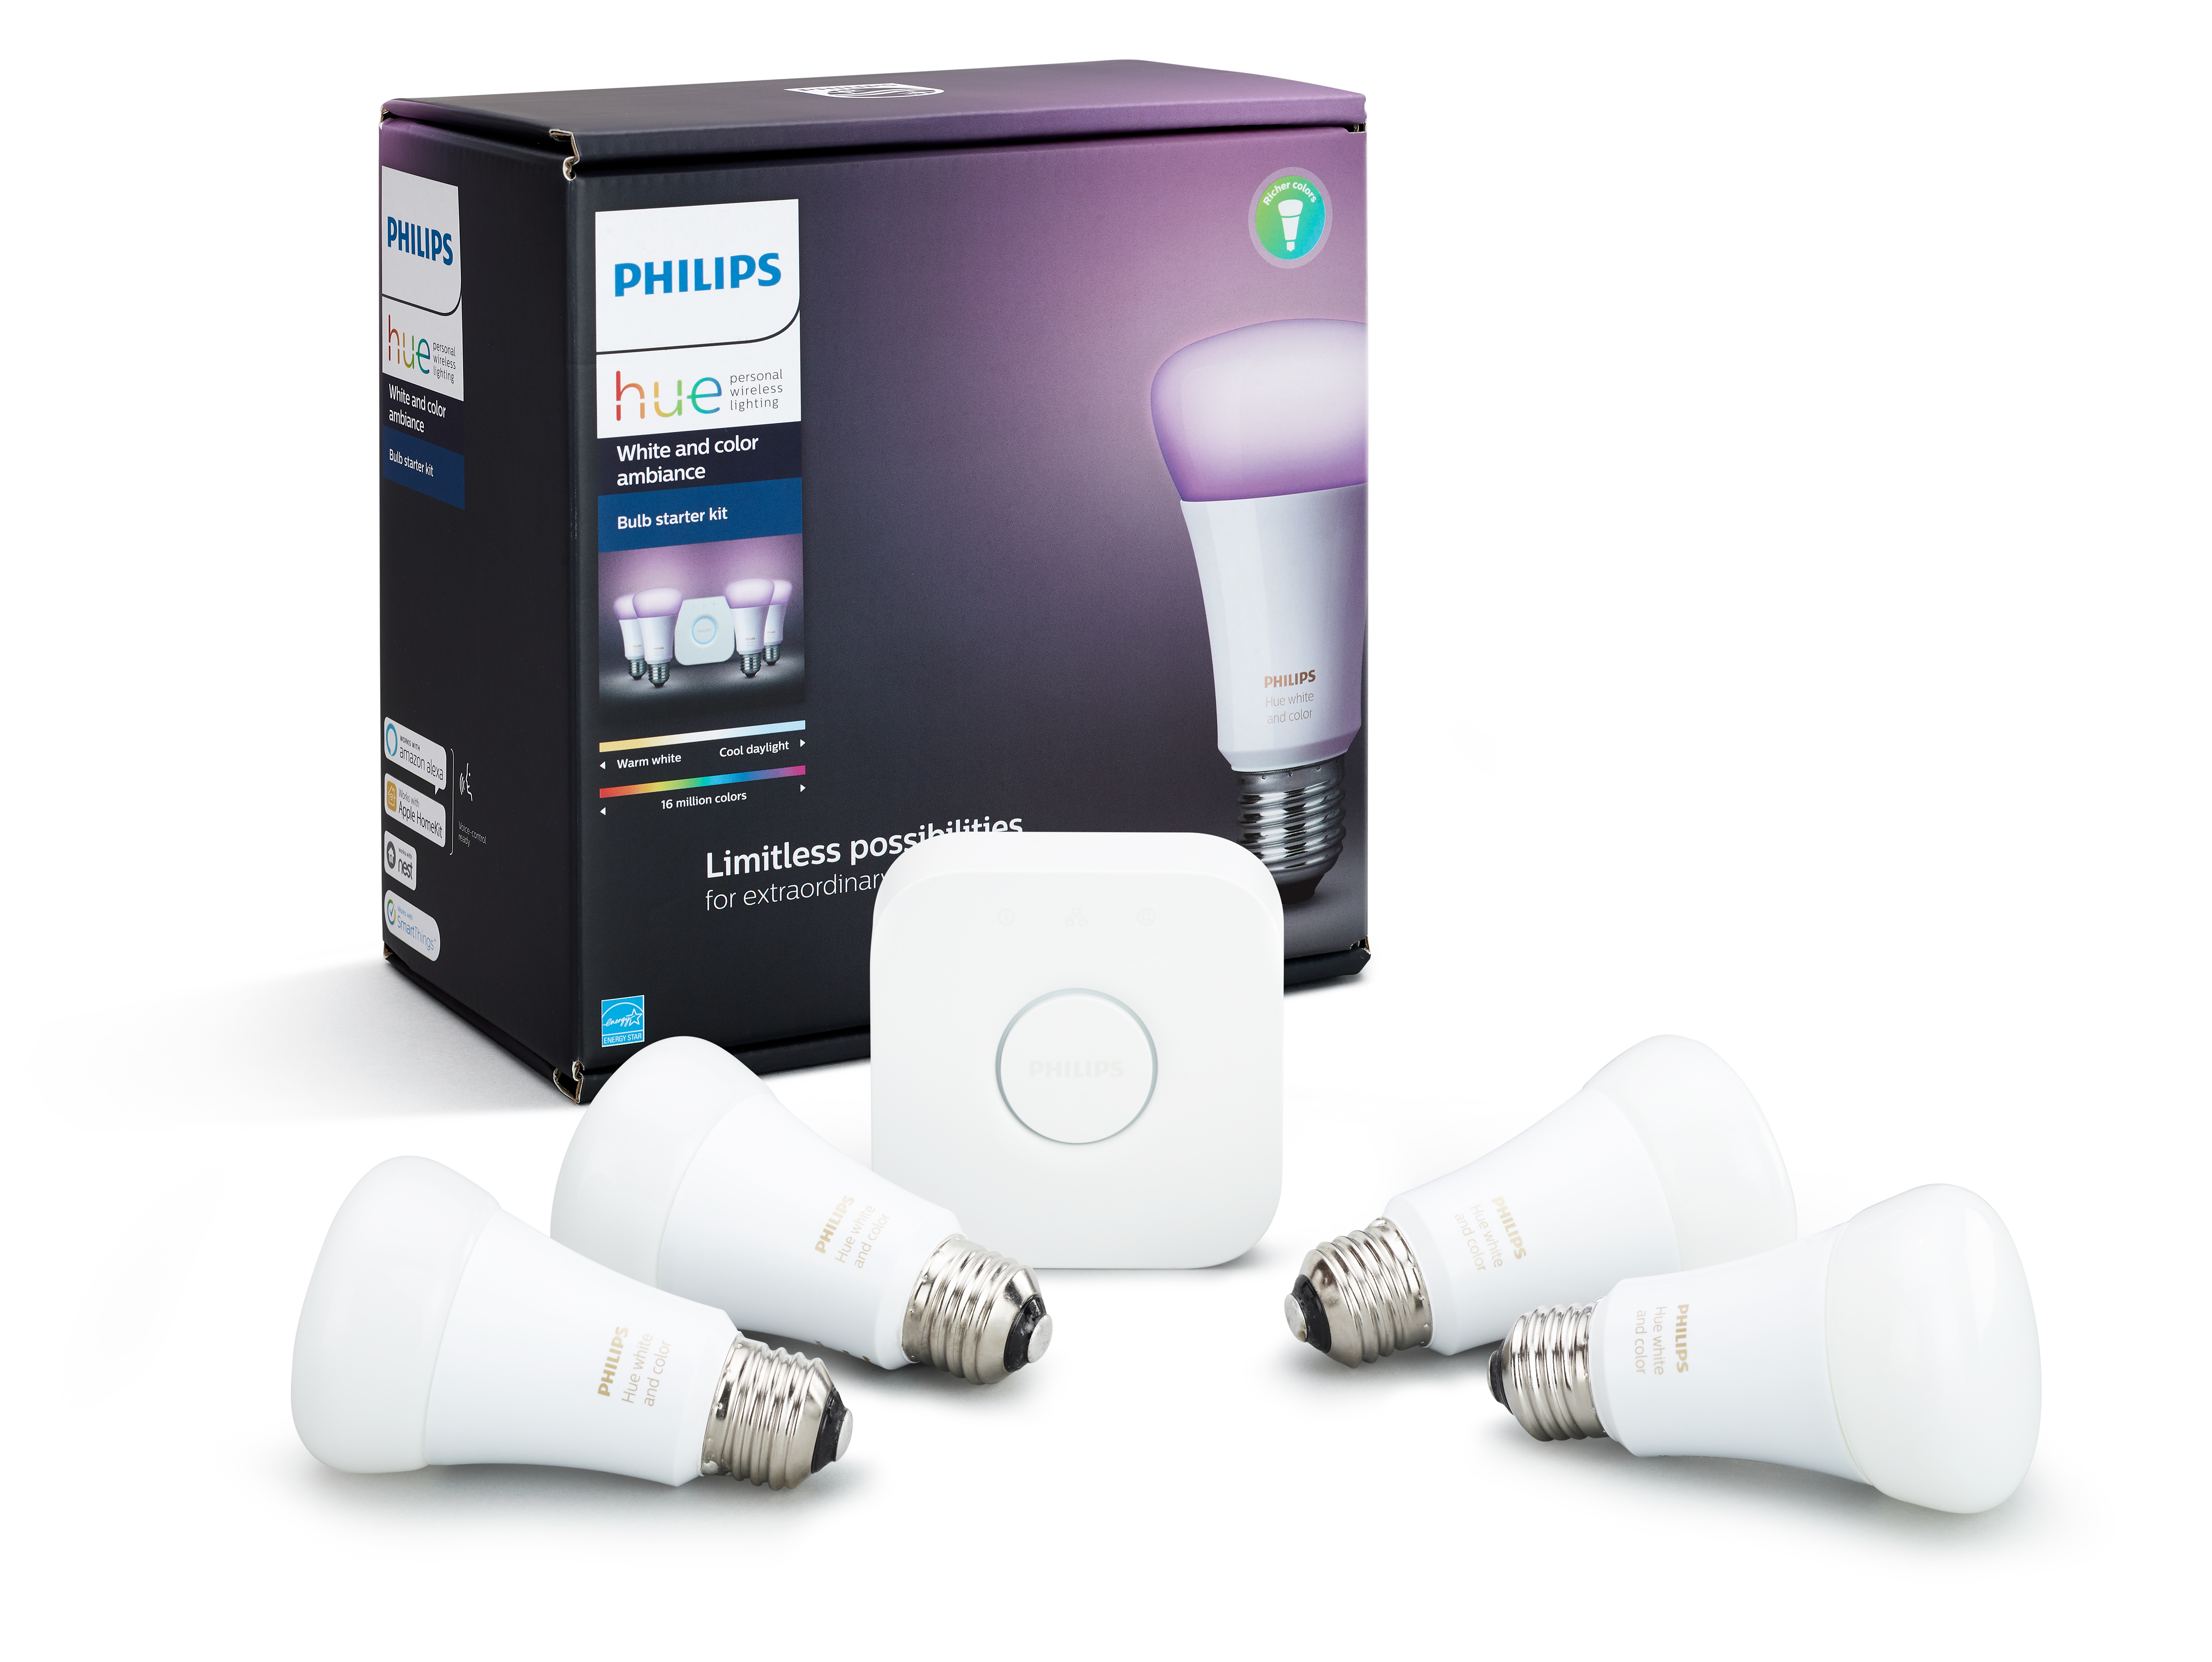 Philips Hue: E14 Luster, Aurelle and Surimu available in new variants -  Matter & Apple HomeKit Blog